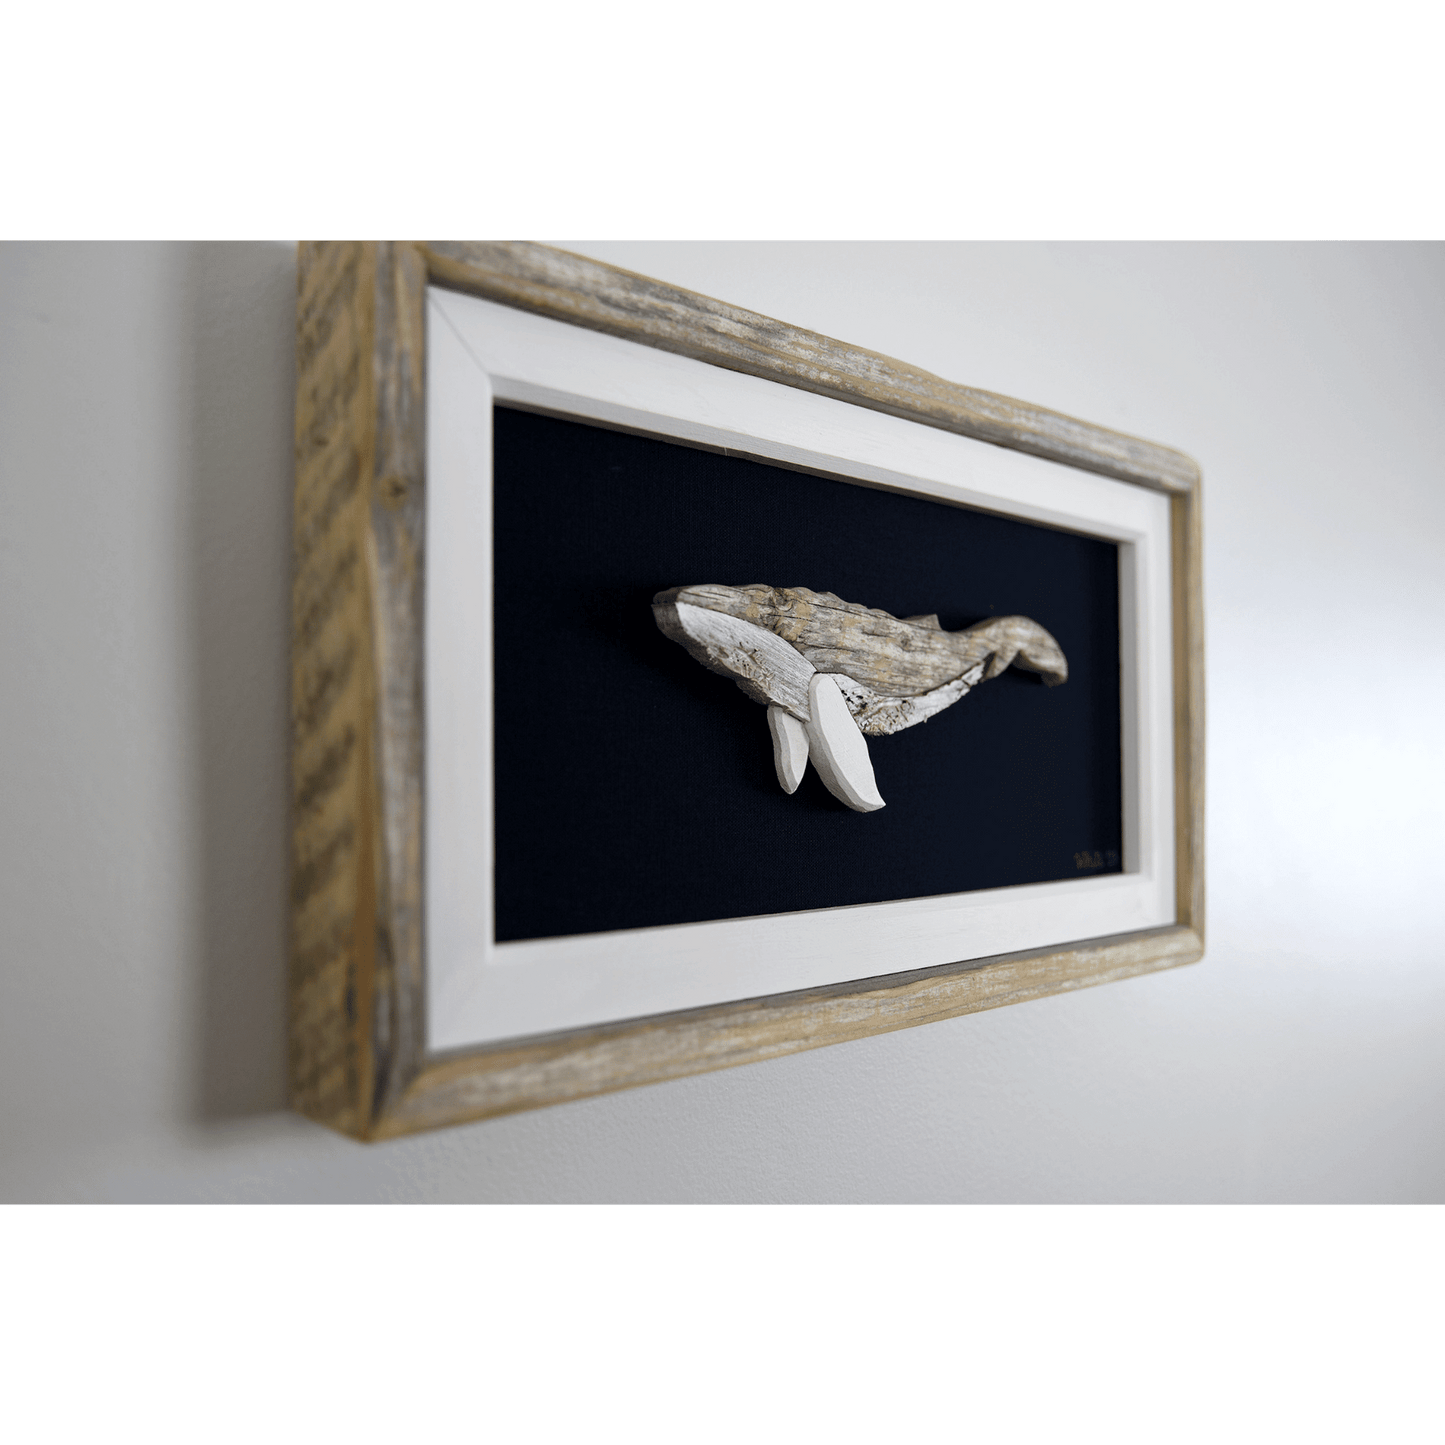   "The Humpback" by The White's Emporium is a mixed media artwork made from various woods and fabric featuring a humpback whale. 